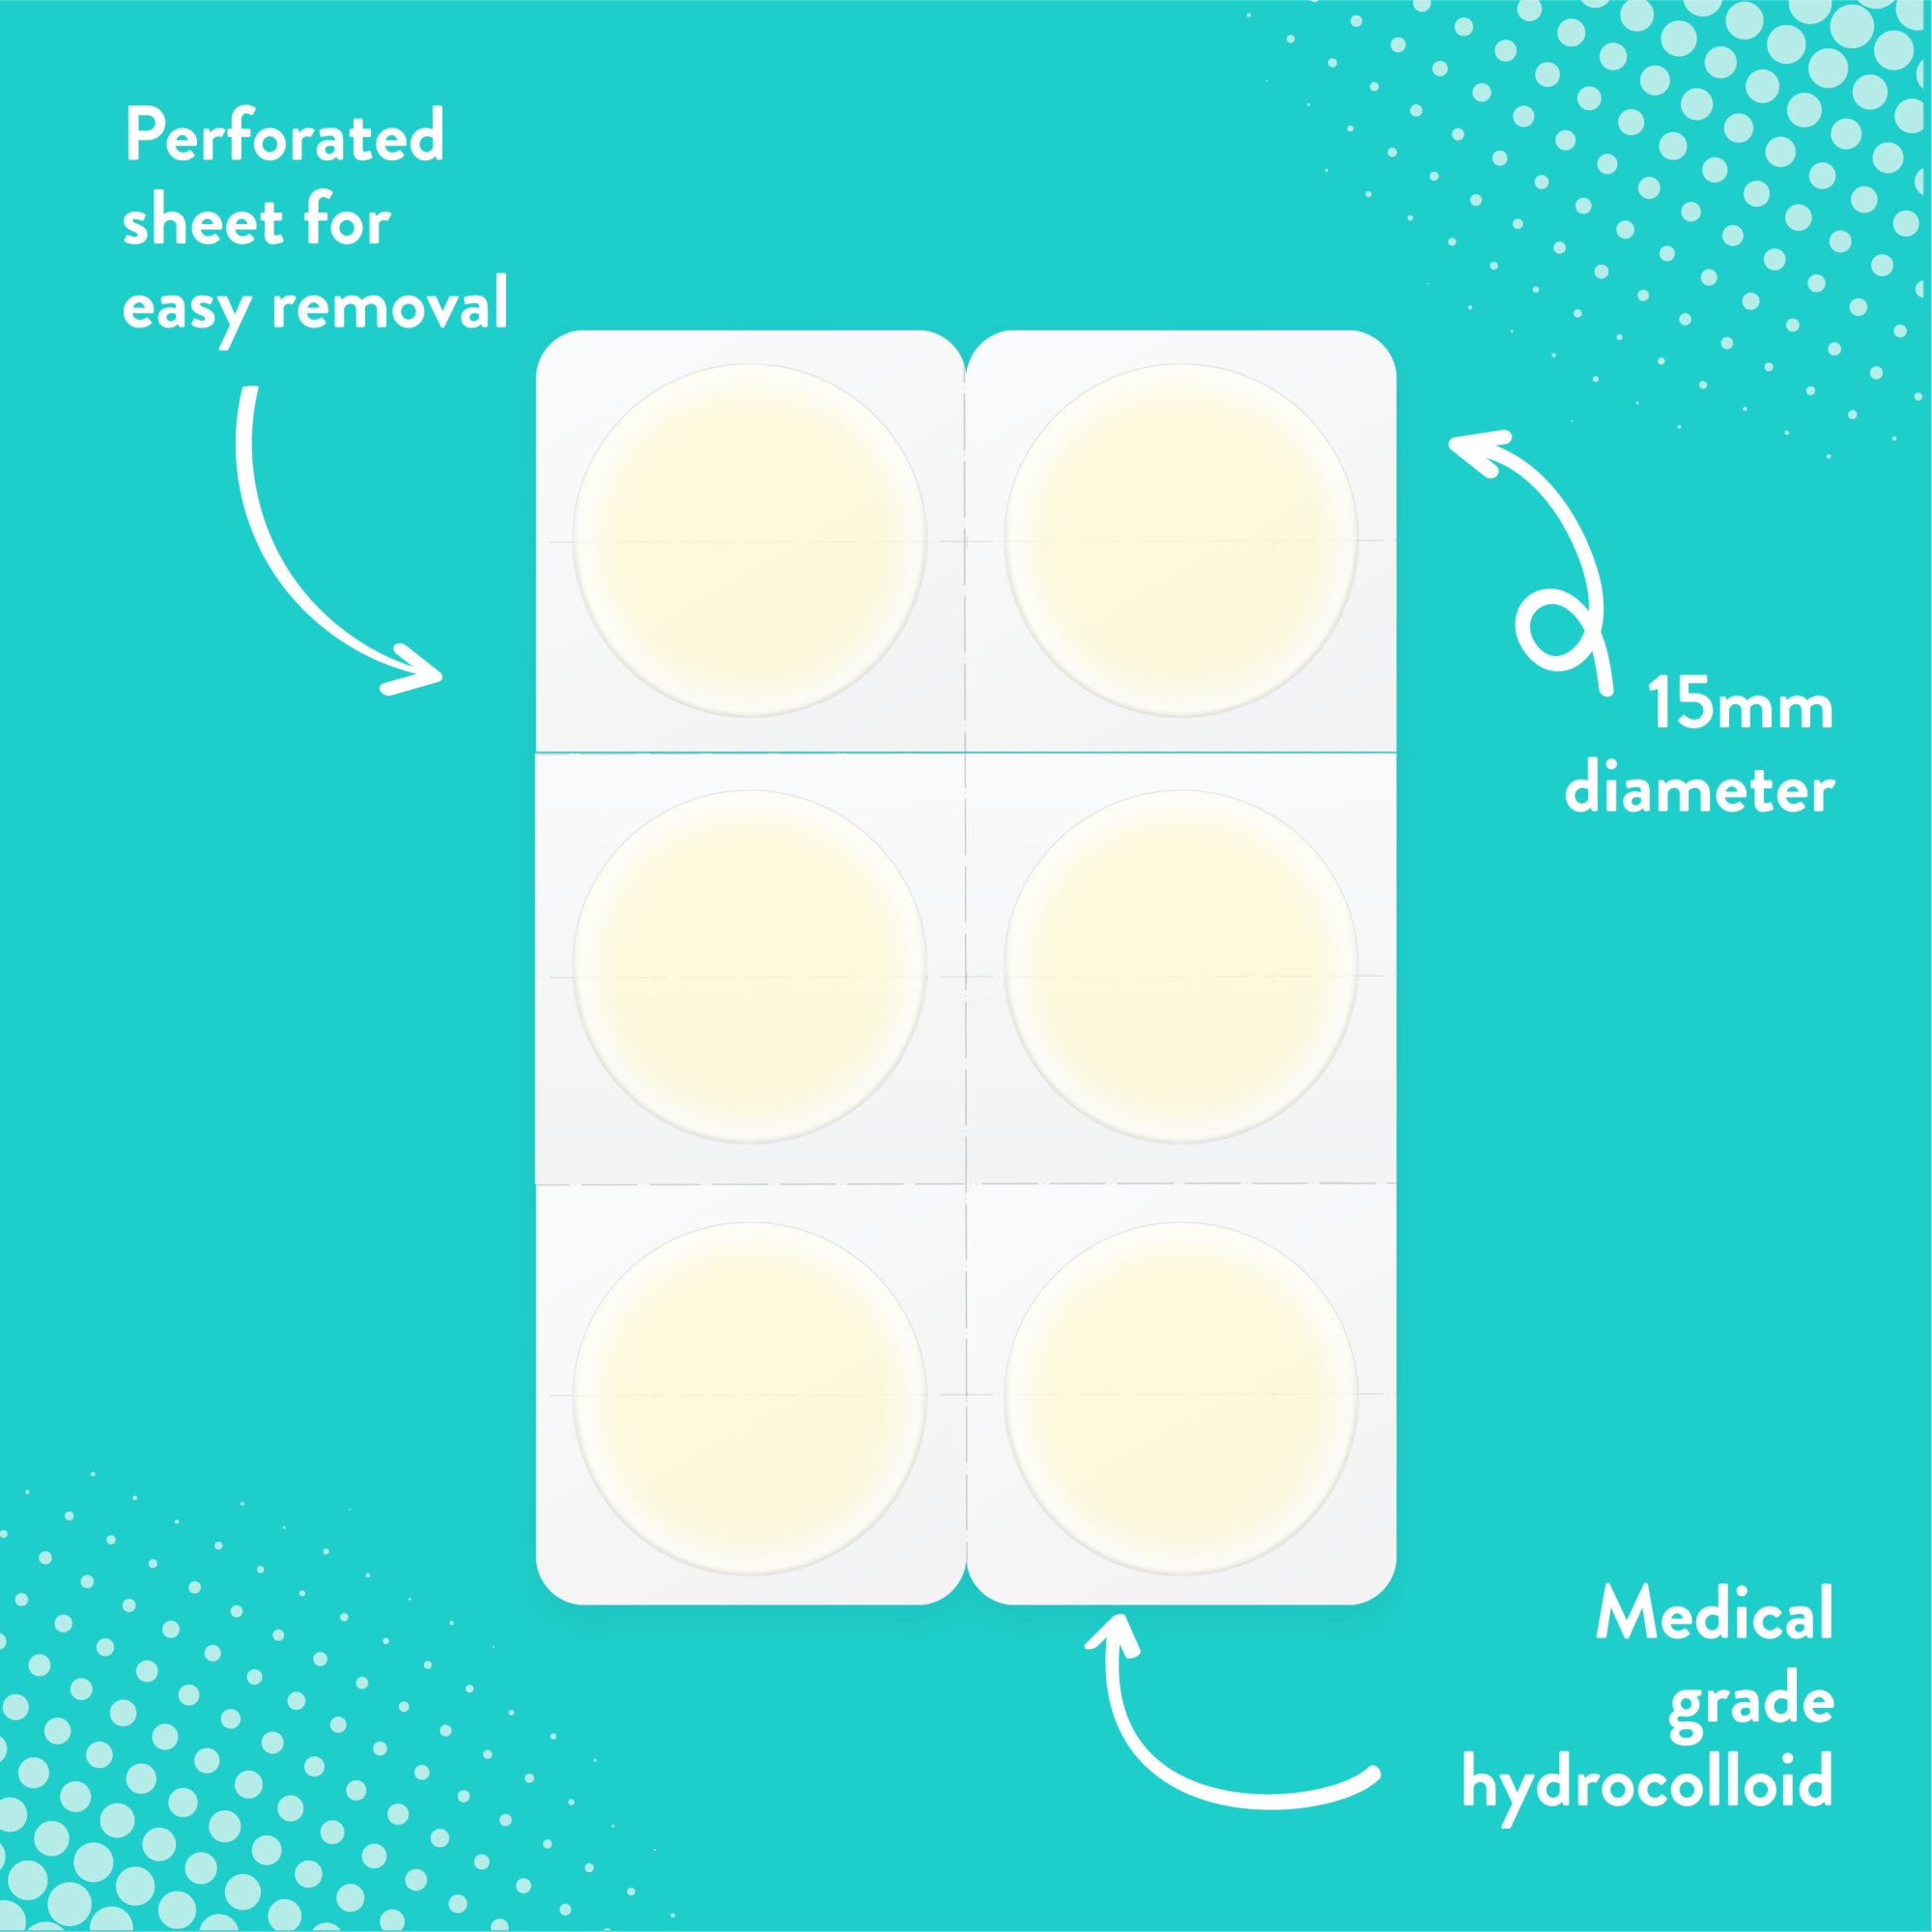 Perforated sheet for easy removal. 15mm diameter. Medical grade hydrocolloid.